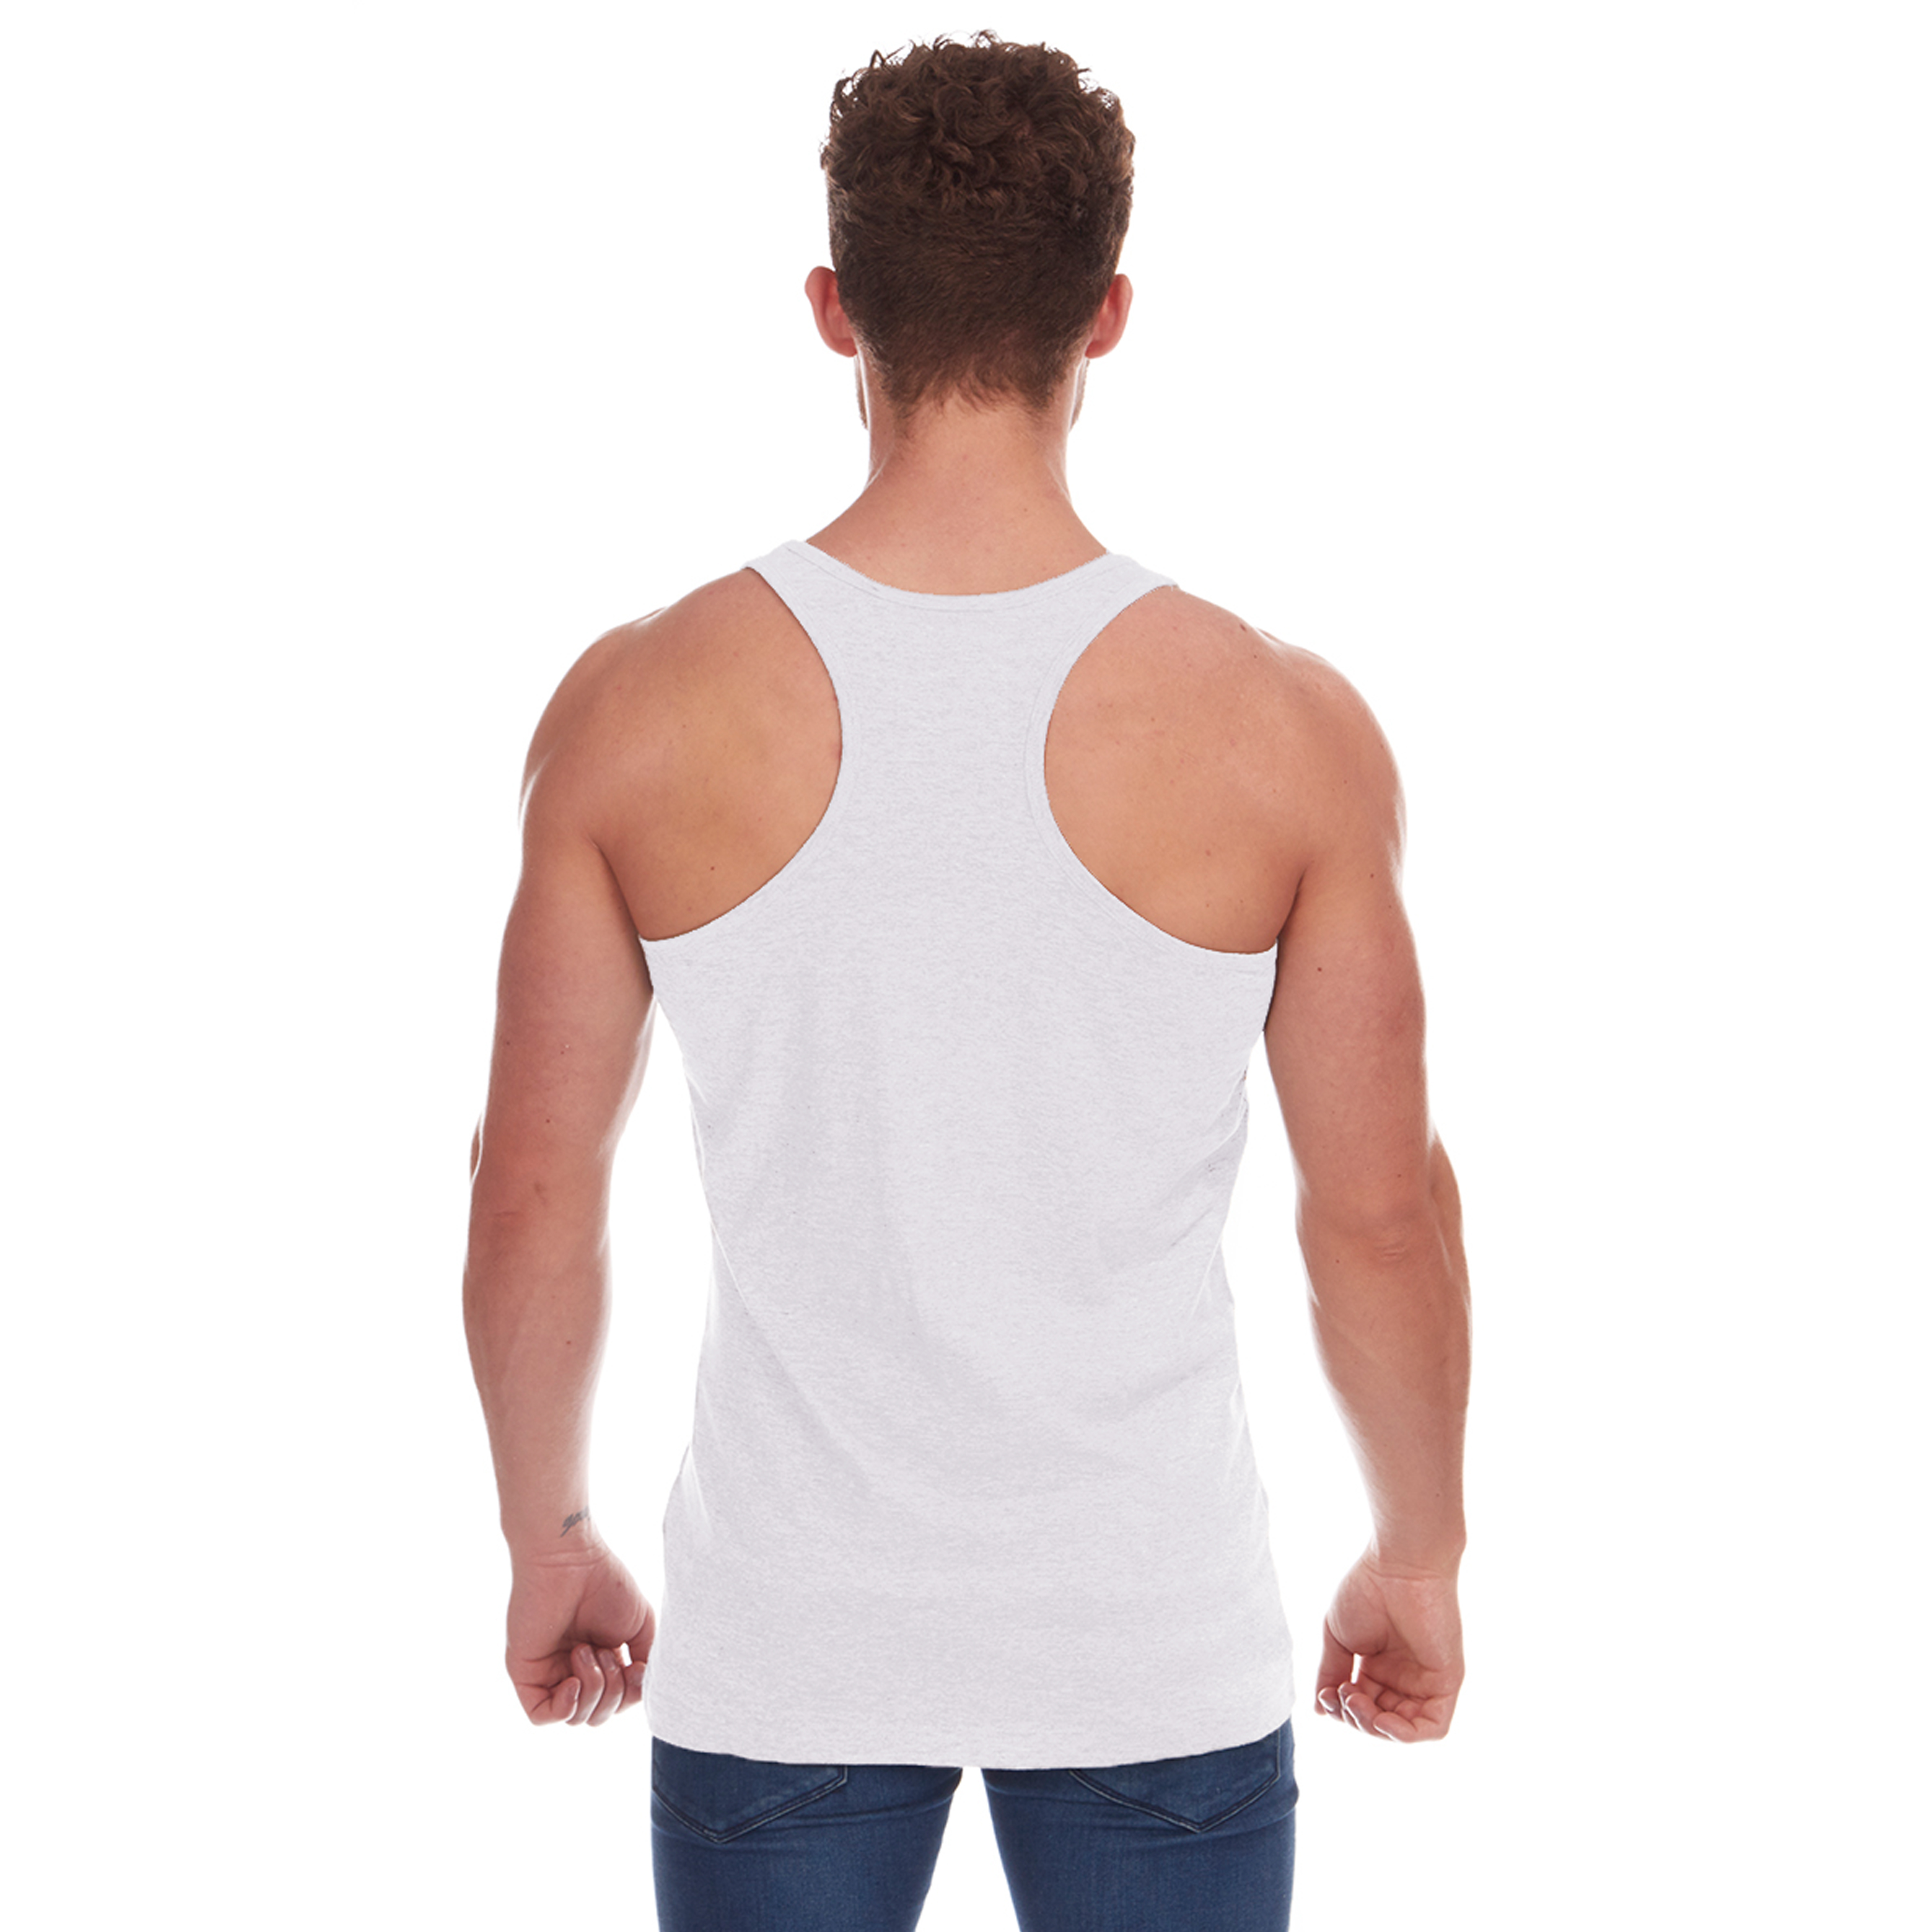 Oopp Jfhg Vest Sleeveless Shirts Fit Mens Always Be Yourself Moose Sand Muscle 